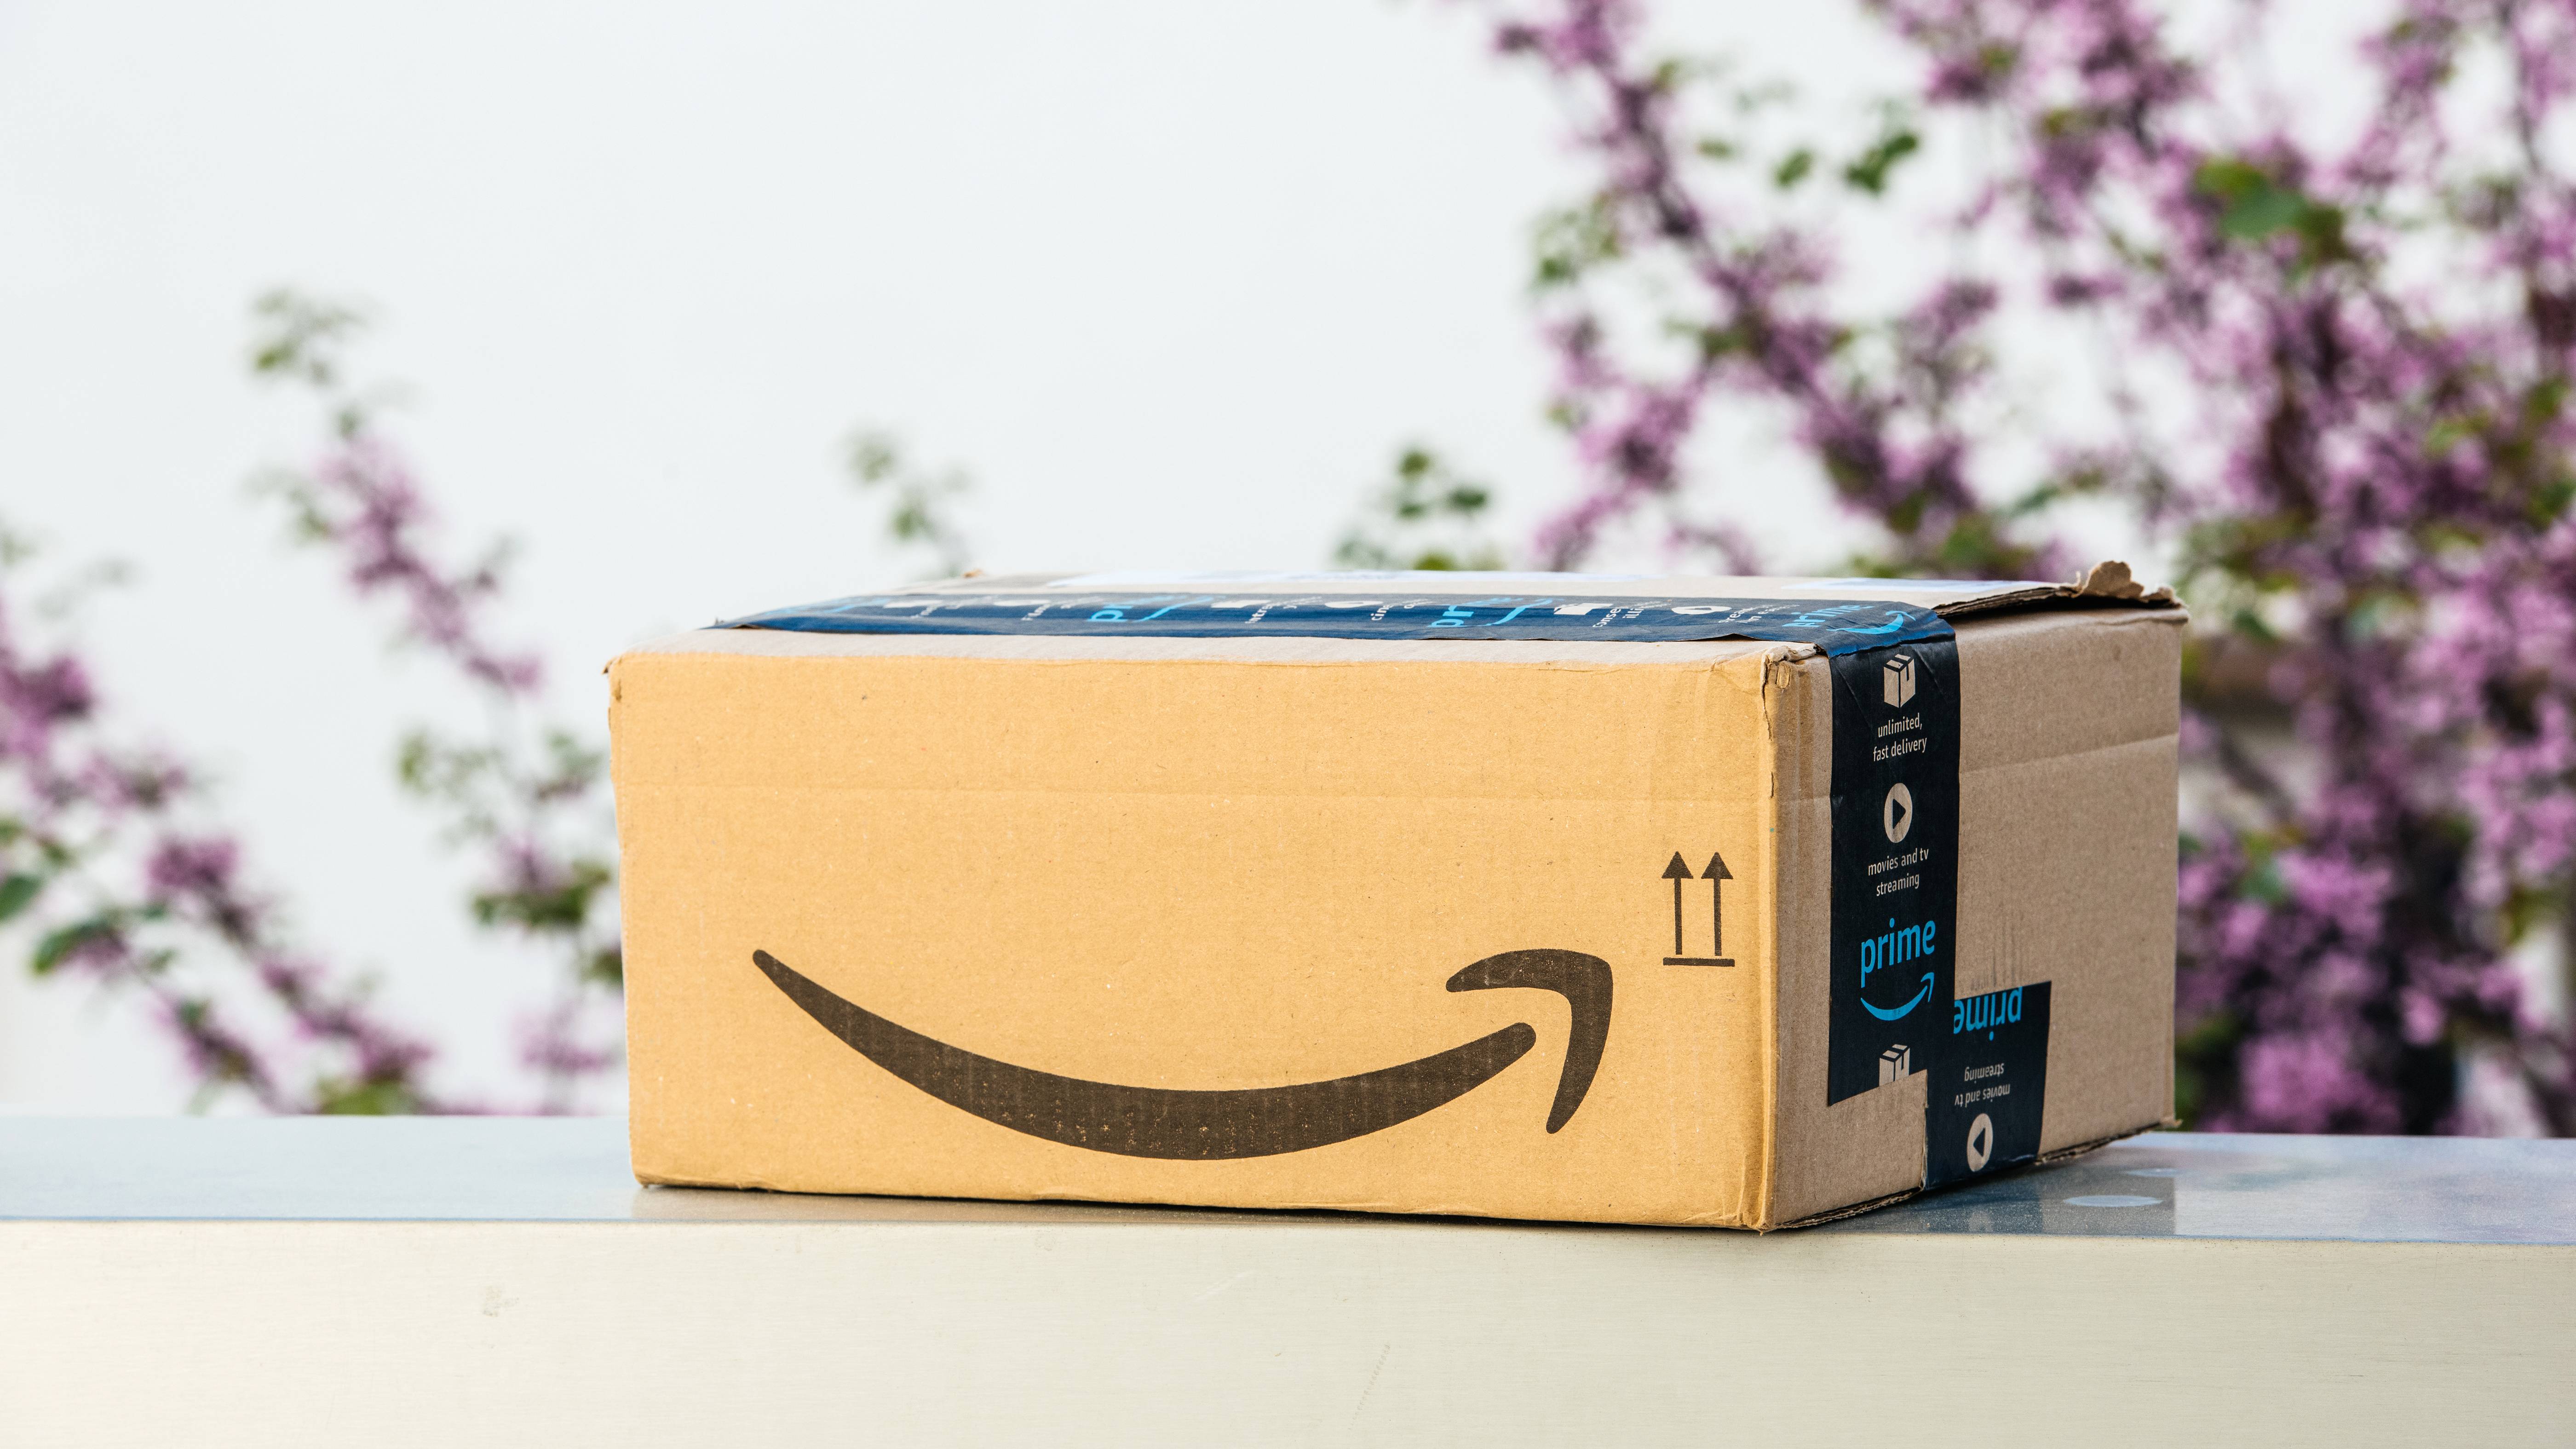 Cardboard box with amazon smile logo on the front and wrapped in Prime Day tape